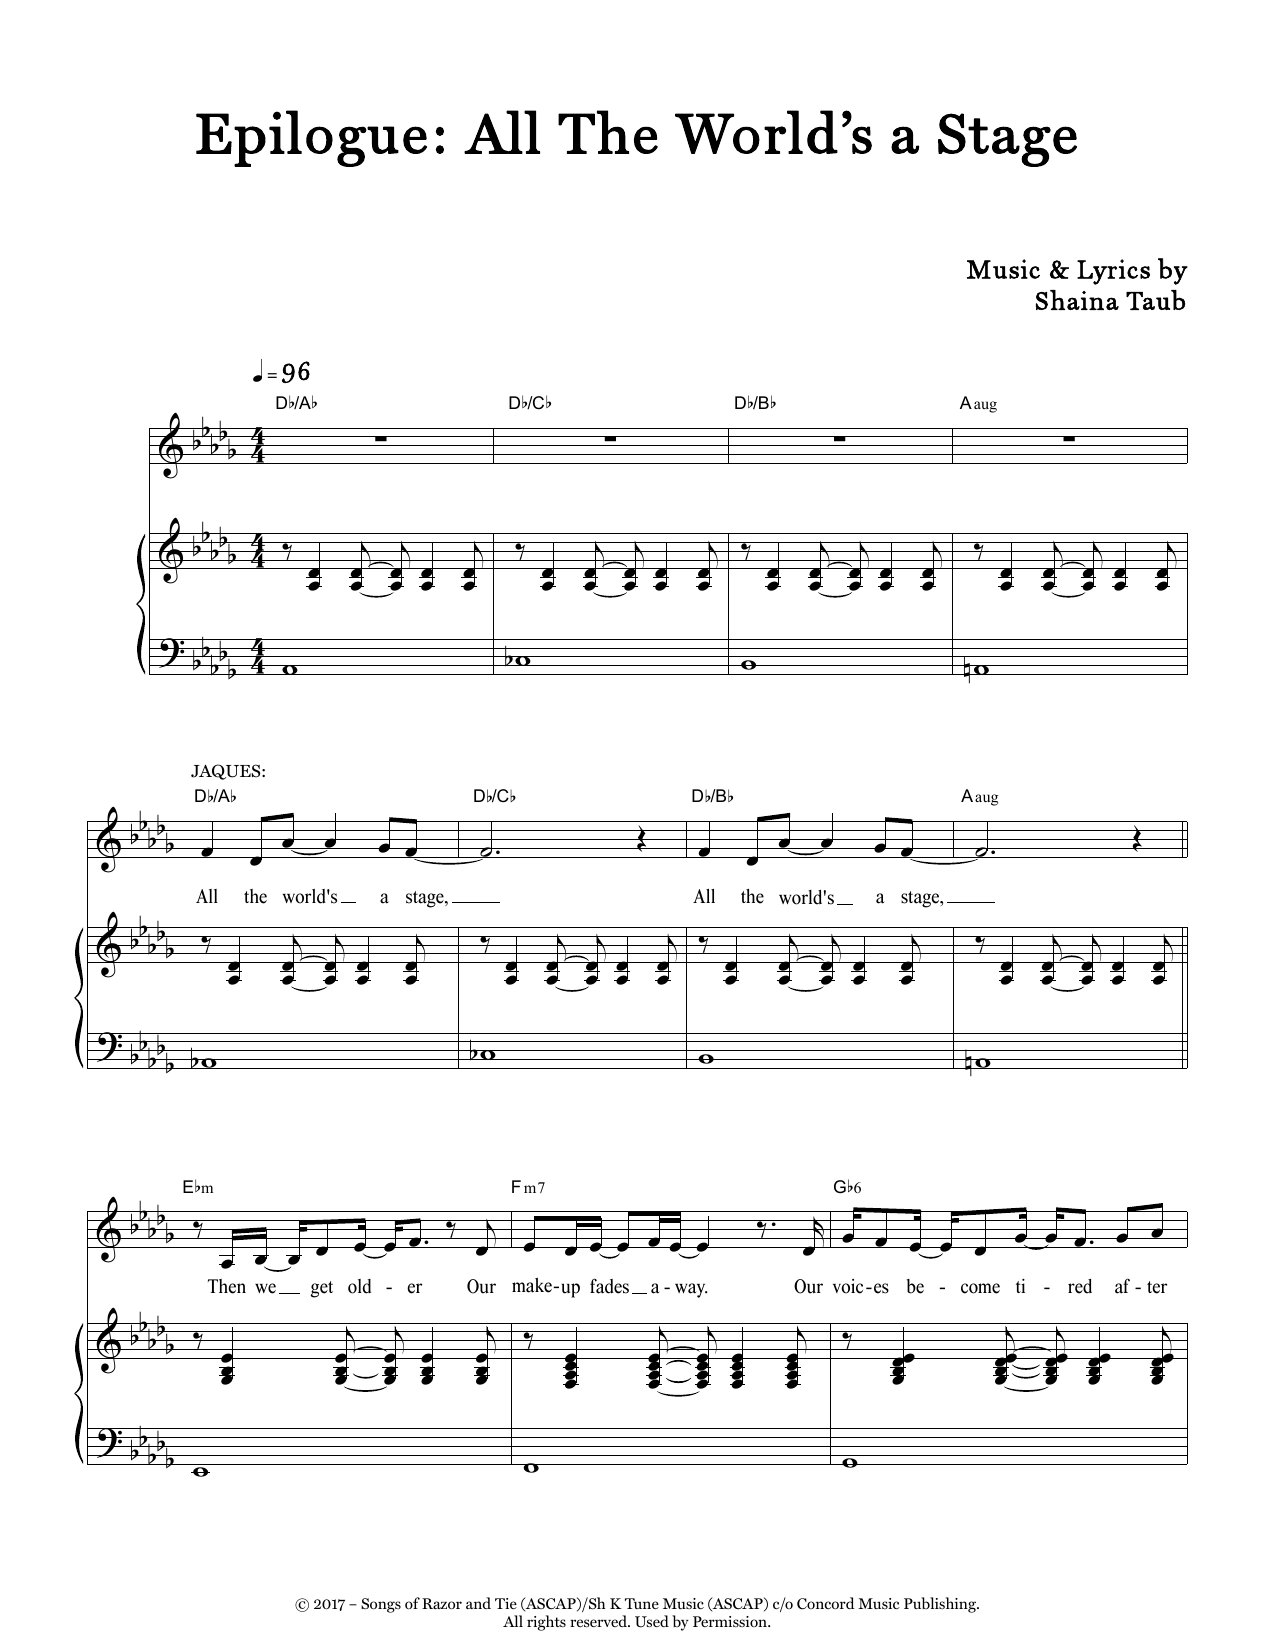 Download Shaina Taub Epilogue: All The World's A Stage (from Sheet Music